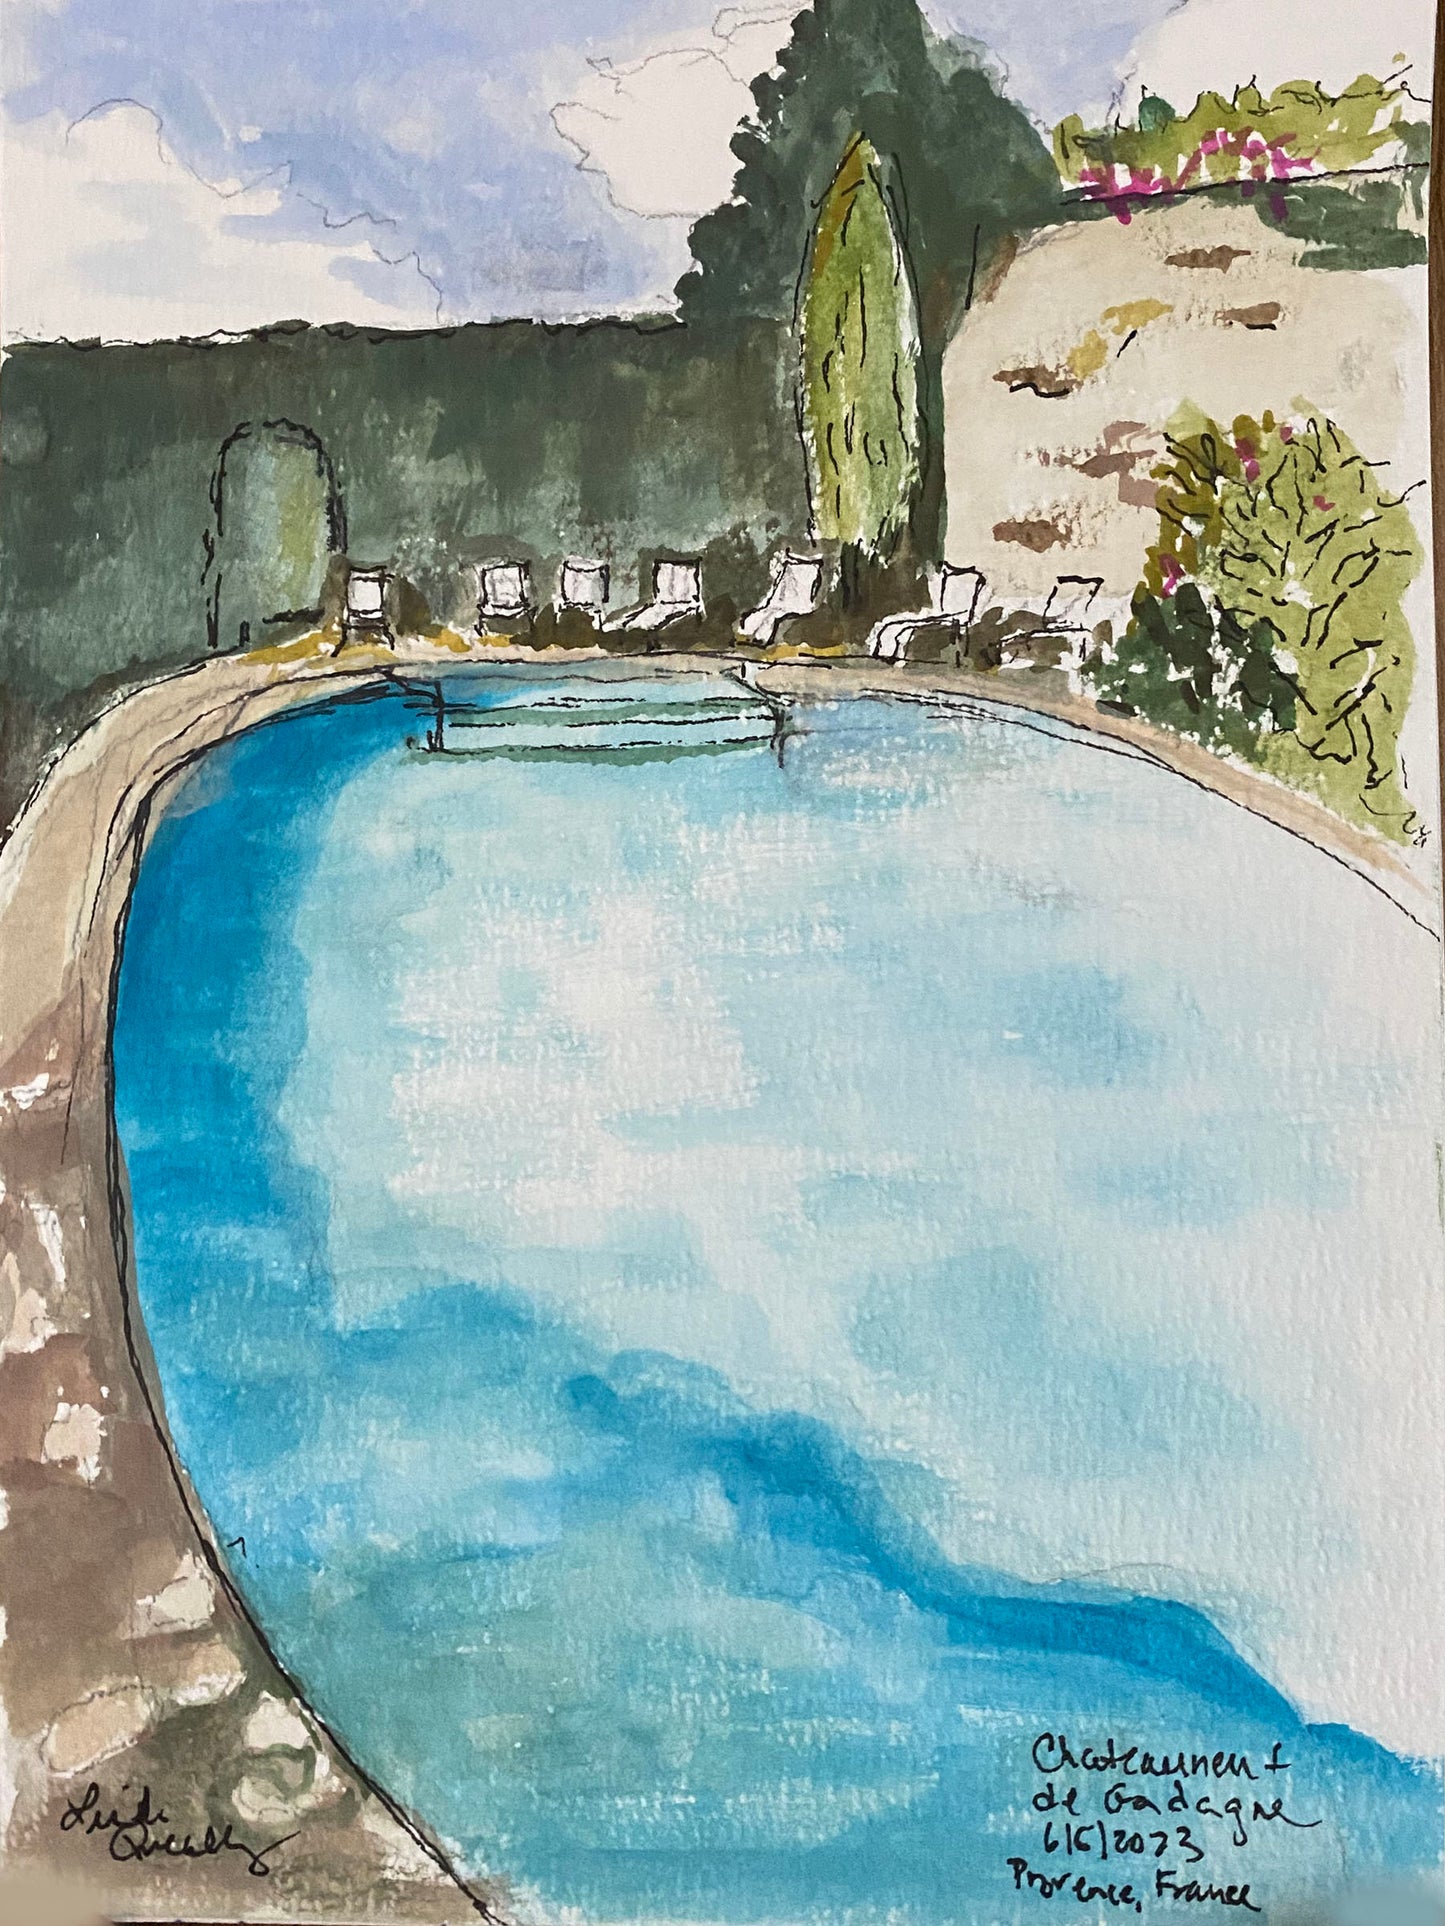 "Chateauneuf-de-Gadagne" Swimming Pool Sketch #3